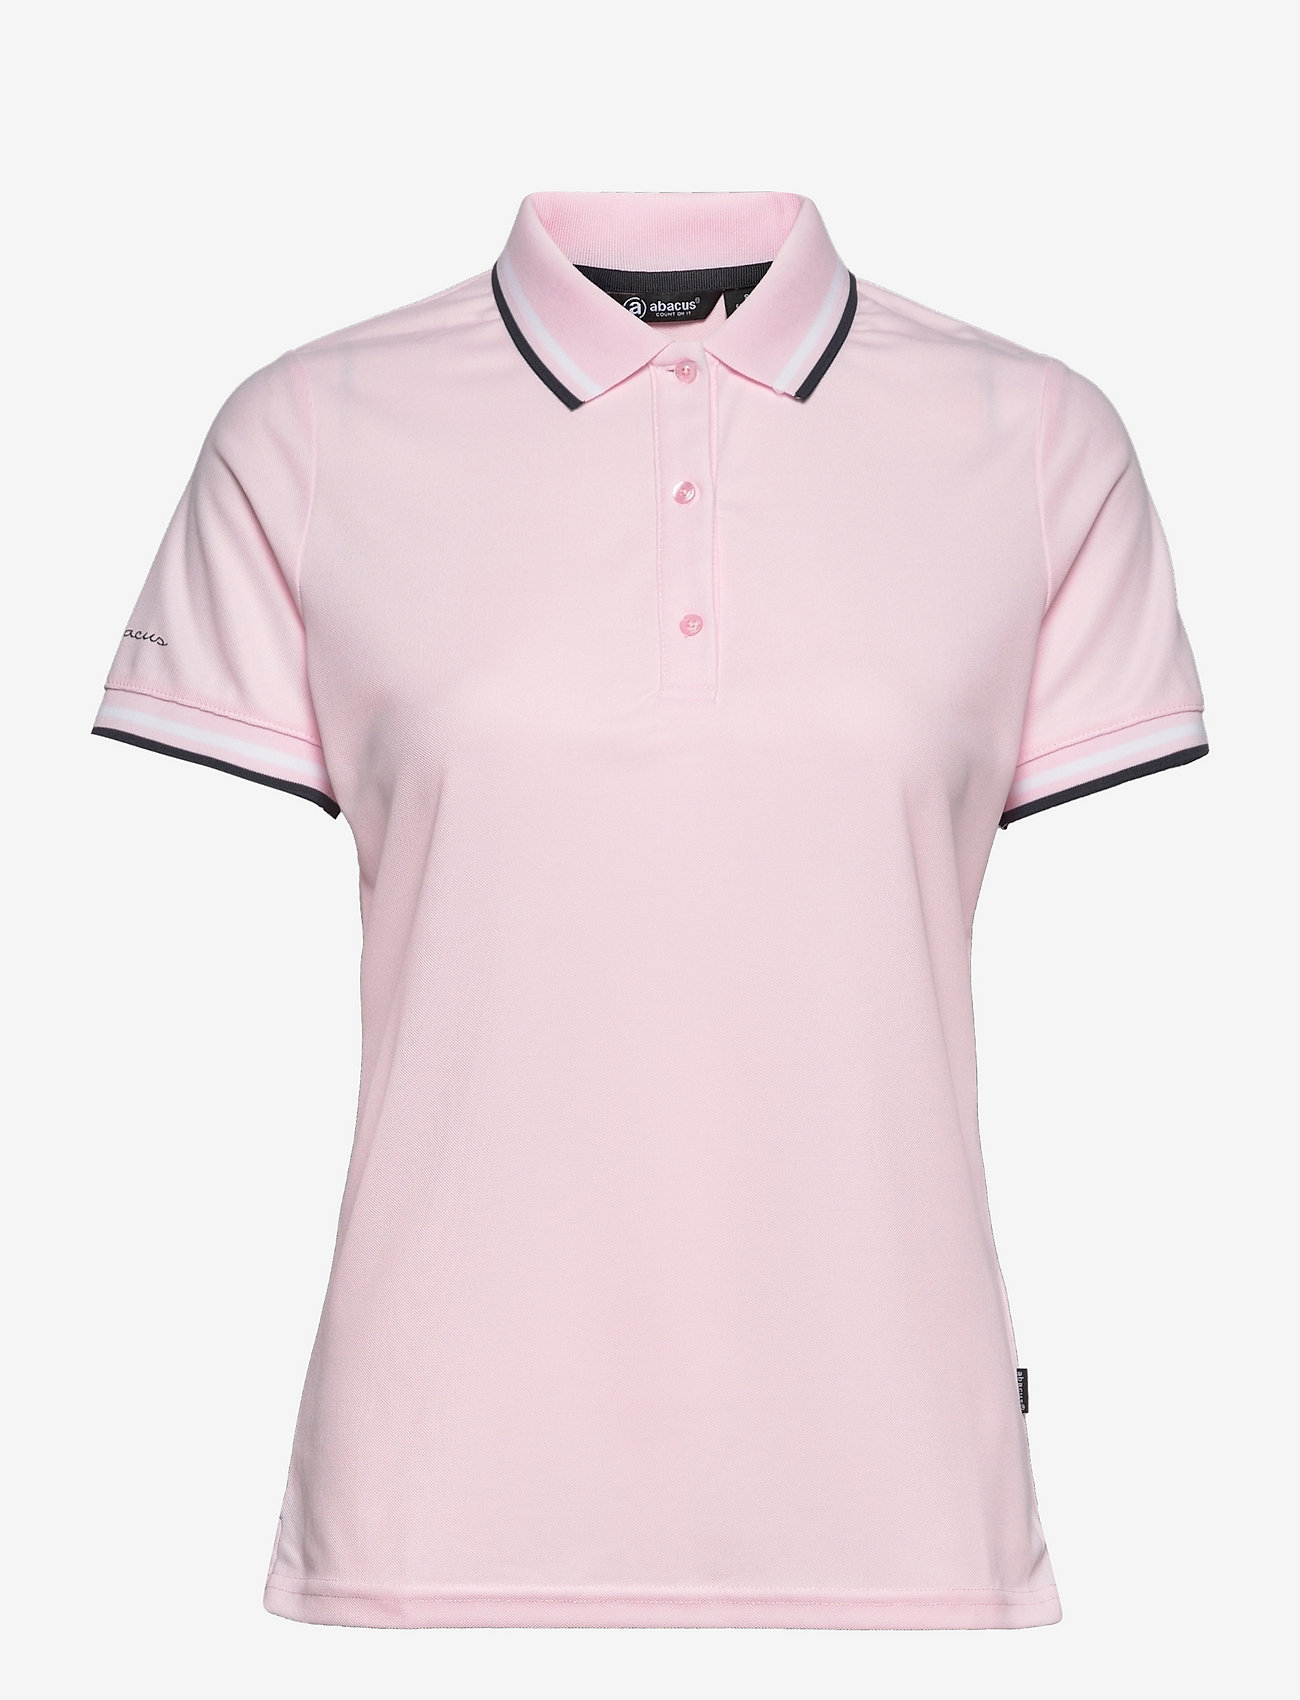 Abacus - Lds Pines polo - tops & t-shirts - lt.pink - 0